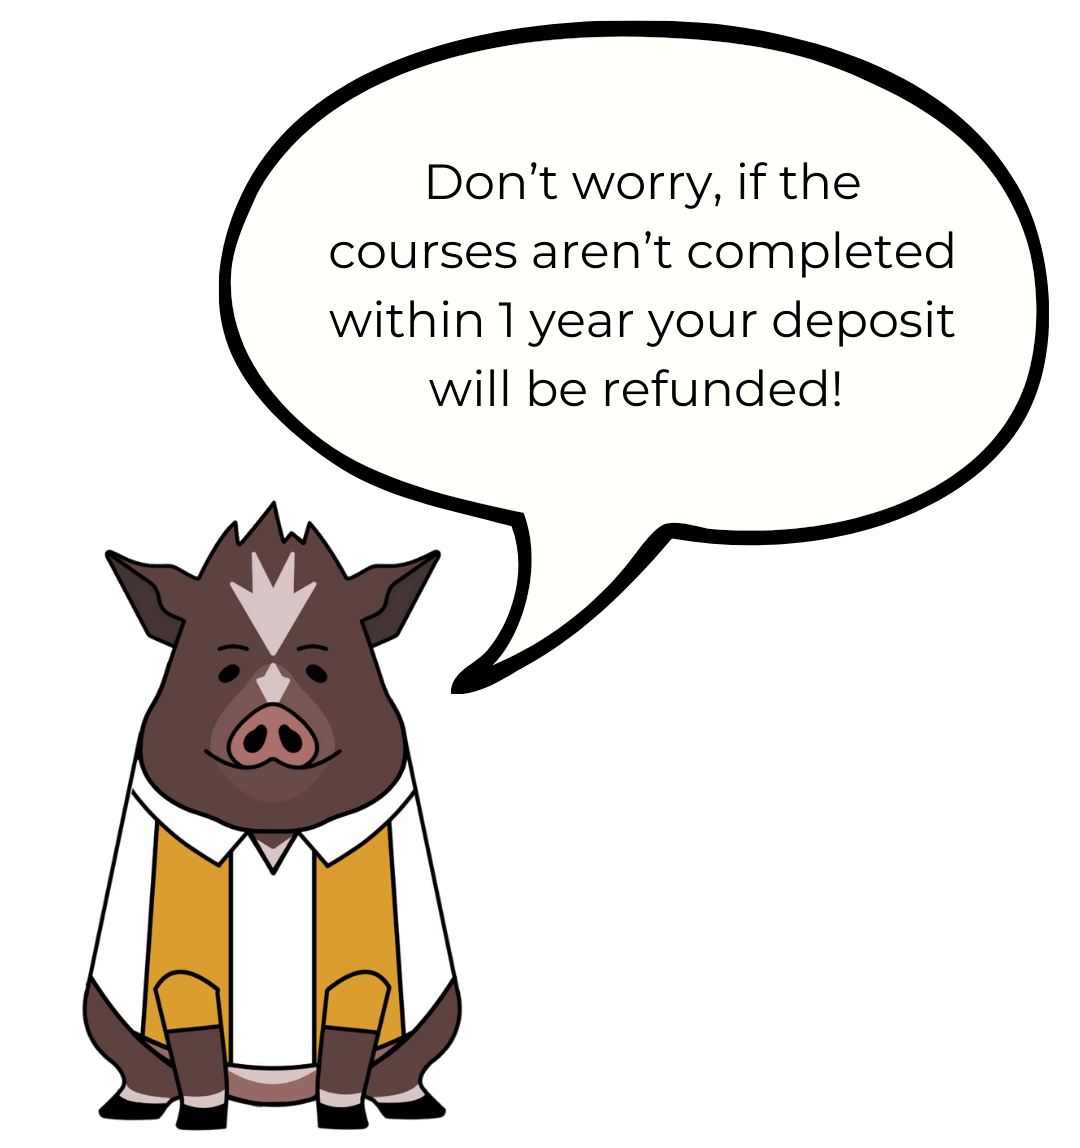 Cartoon drawing of Winston with a speech bubble that says, "Don't worry, if the courses aren't completed within 1 year your deposit will be refunded!"